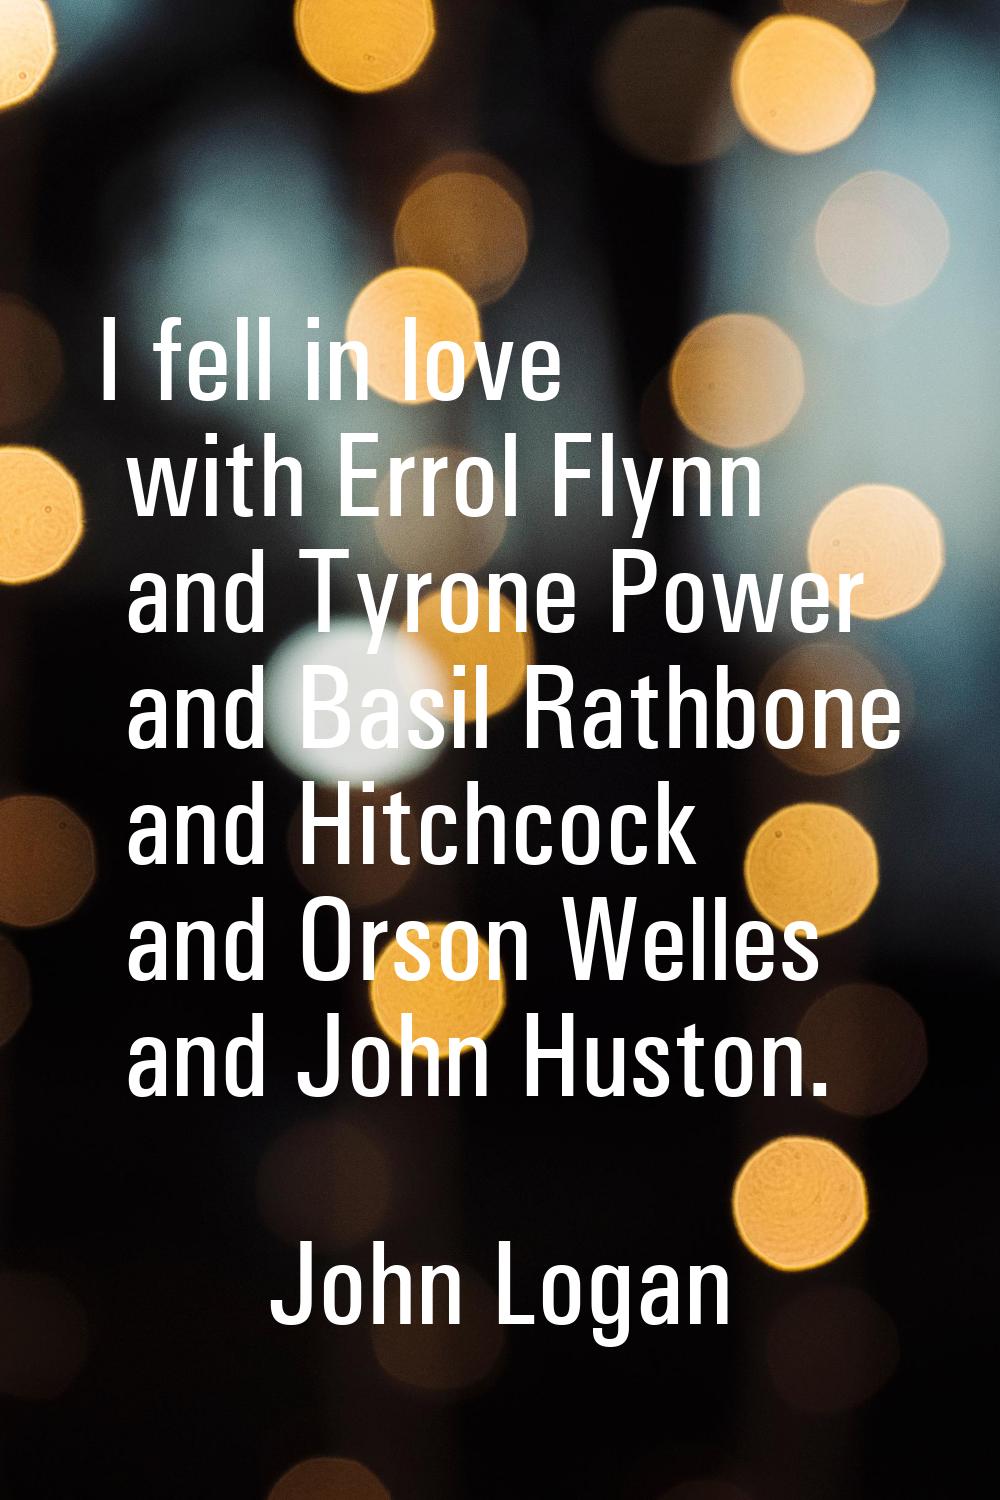 I fell in love with Errol Flynn and Tyrone Power and Basil Rathbone and Hitchcock and Orson Welles 